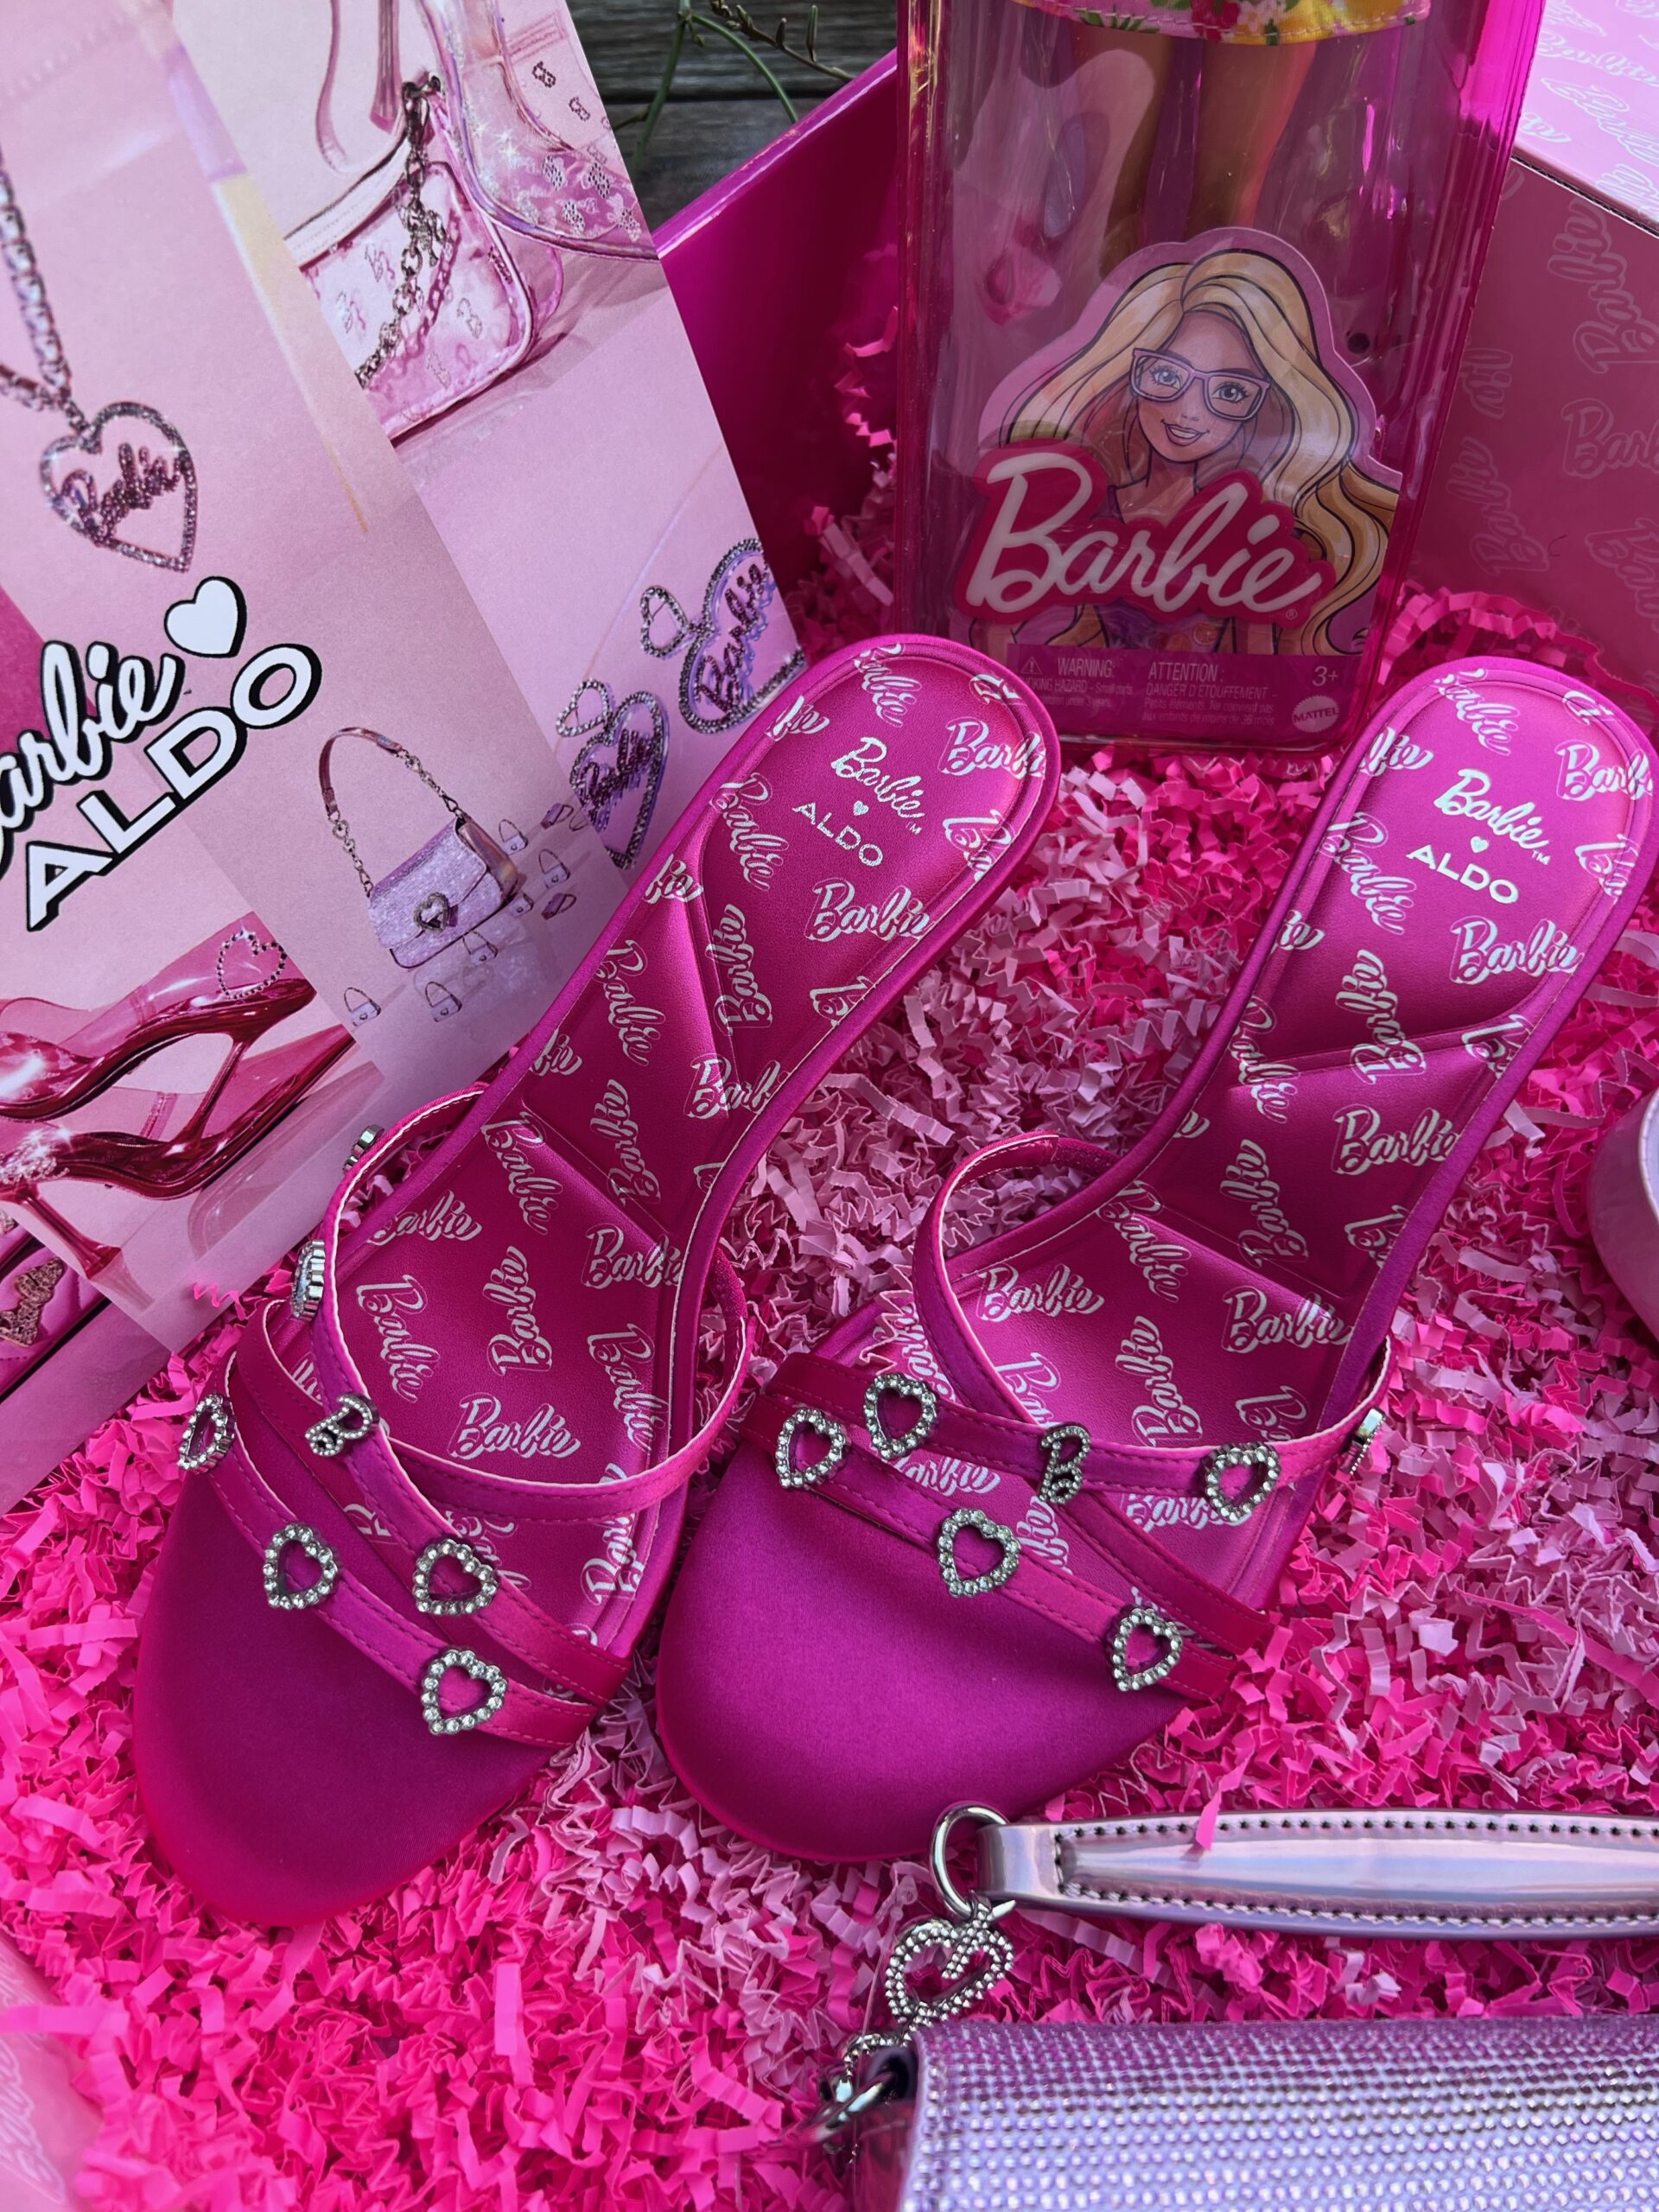 Embrace Elegance and Playfulness with the Barbie x ALDO Collection